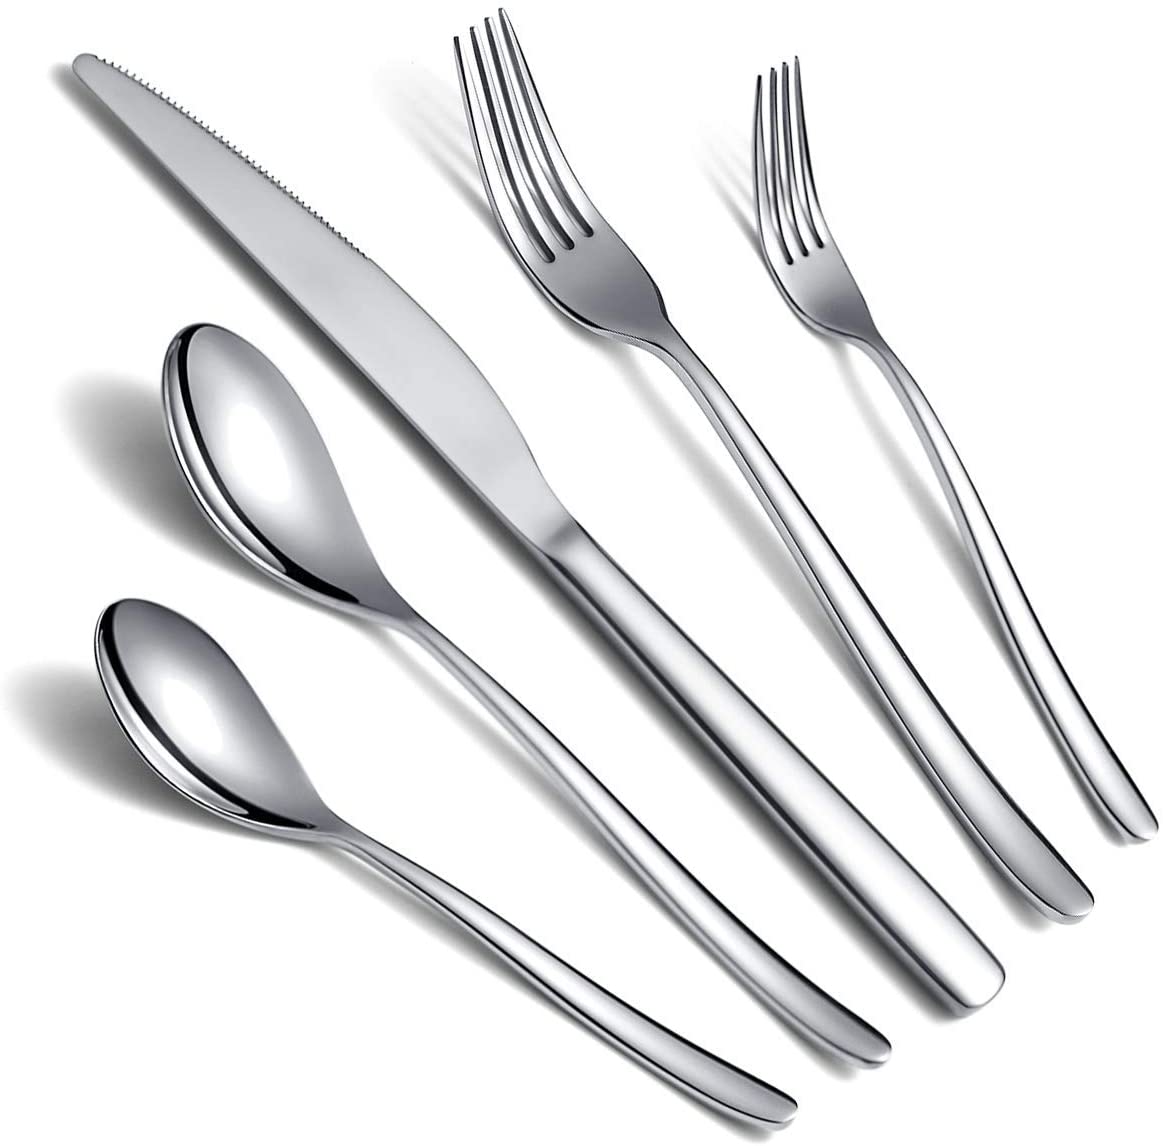 Silverware Set 20-Pieces Flatware Set Stainless Steel Cutlery Set Service for 4,Include Knife/Fork/Spoon,Mirror Polished 